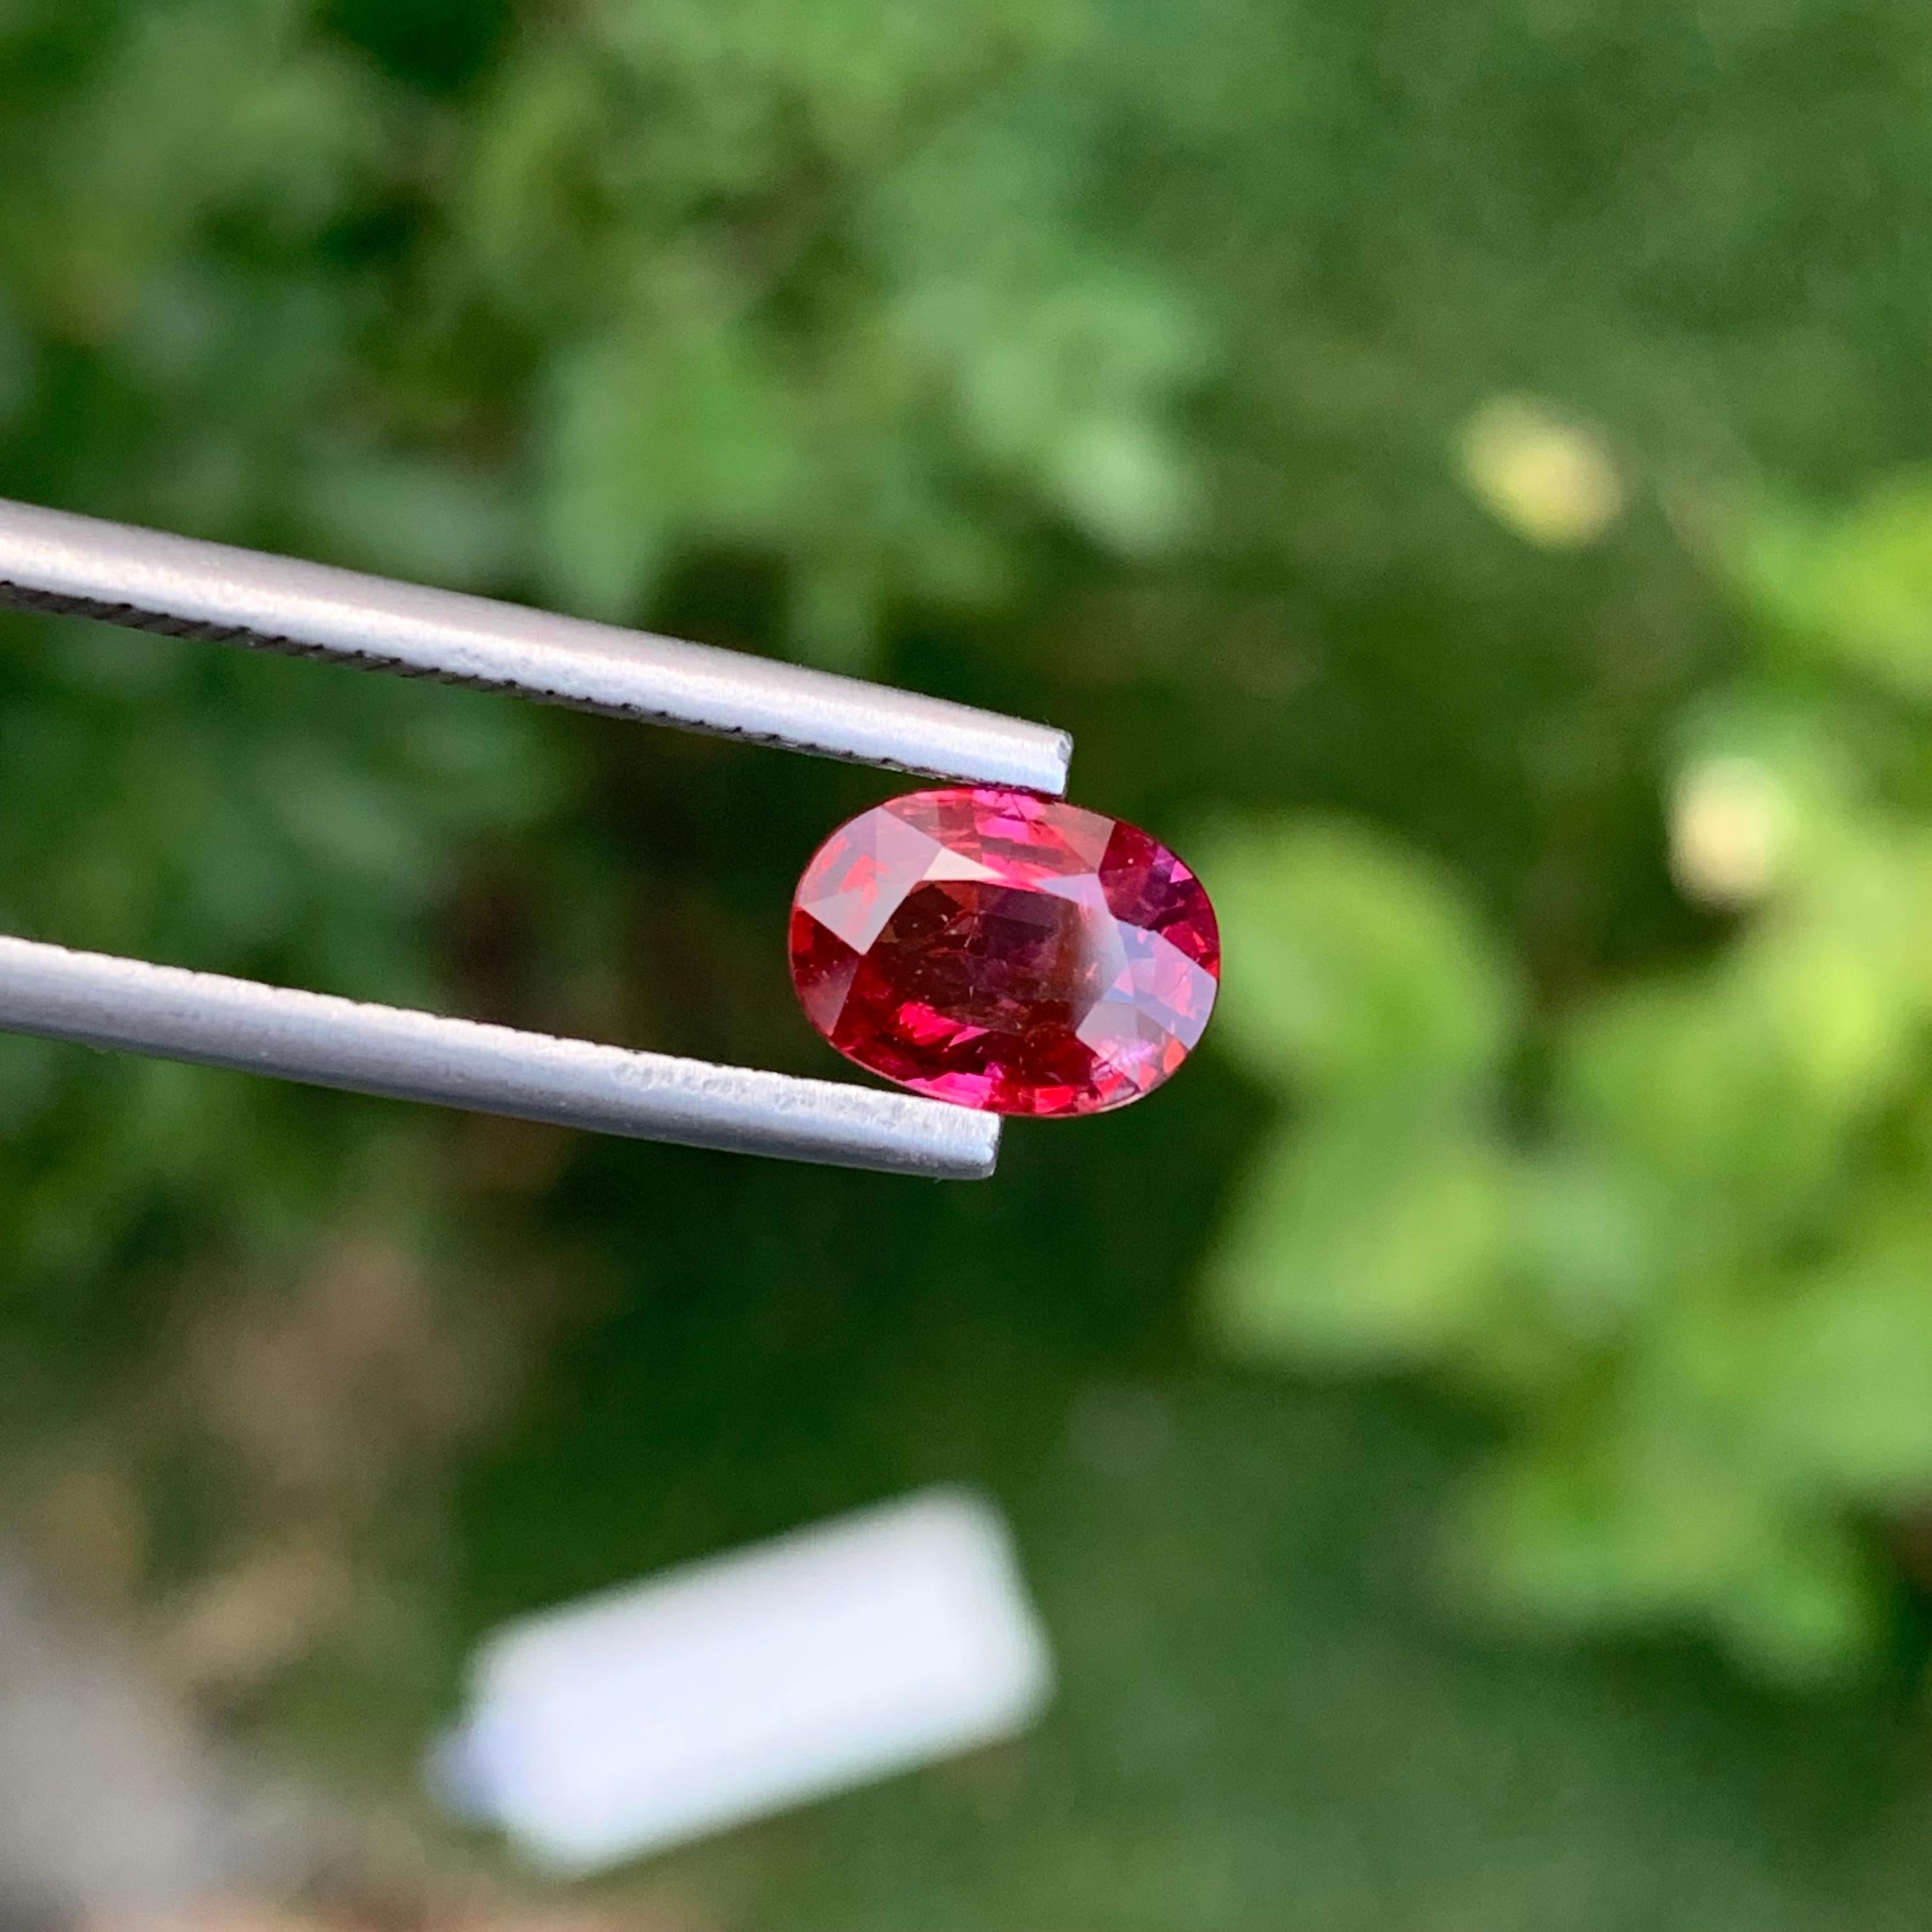 Certified Natural Loose 1.79 Carat Lustrous Ruby Oval Shape Gem From Africa  For Sale 1